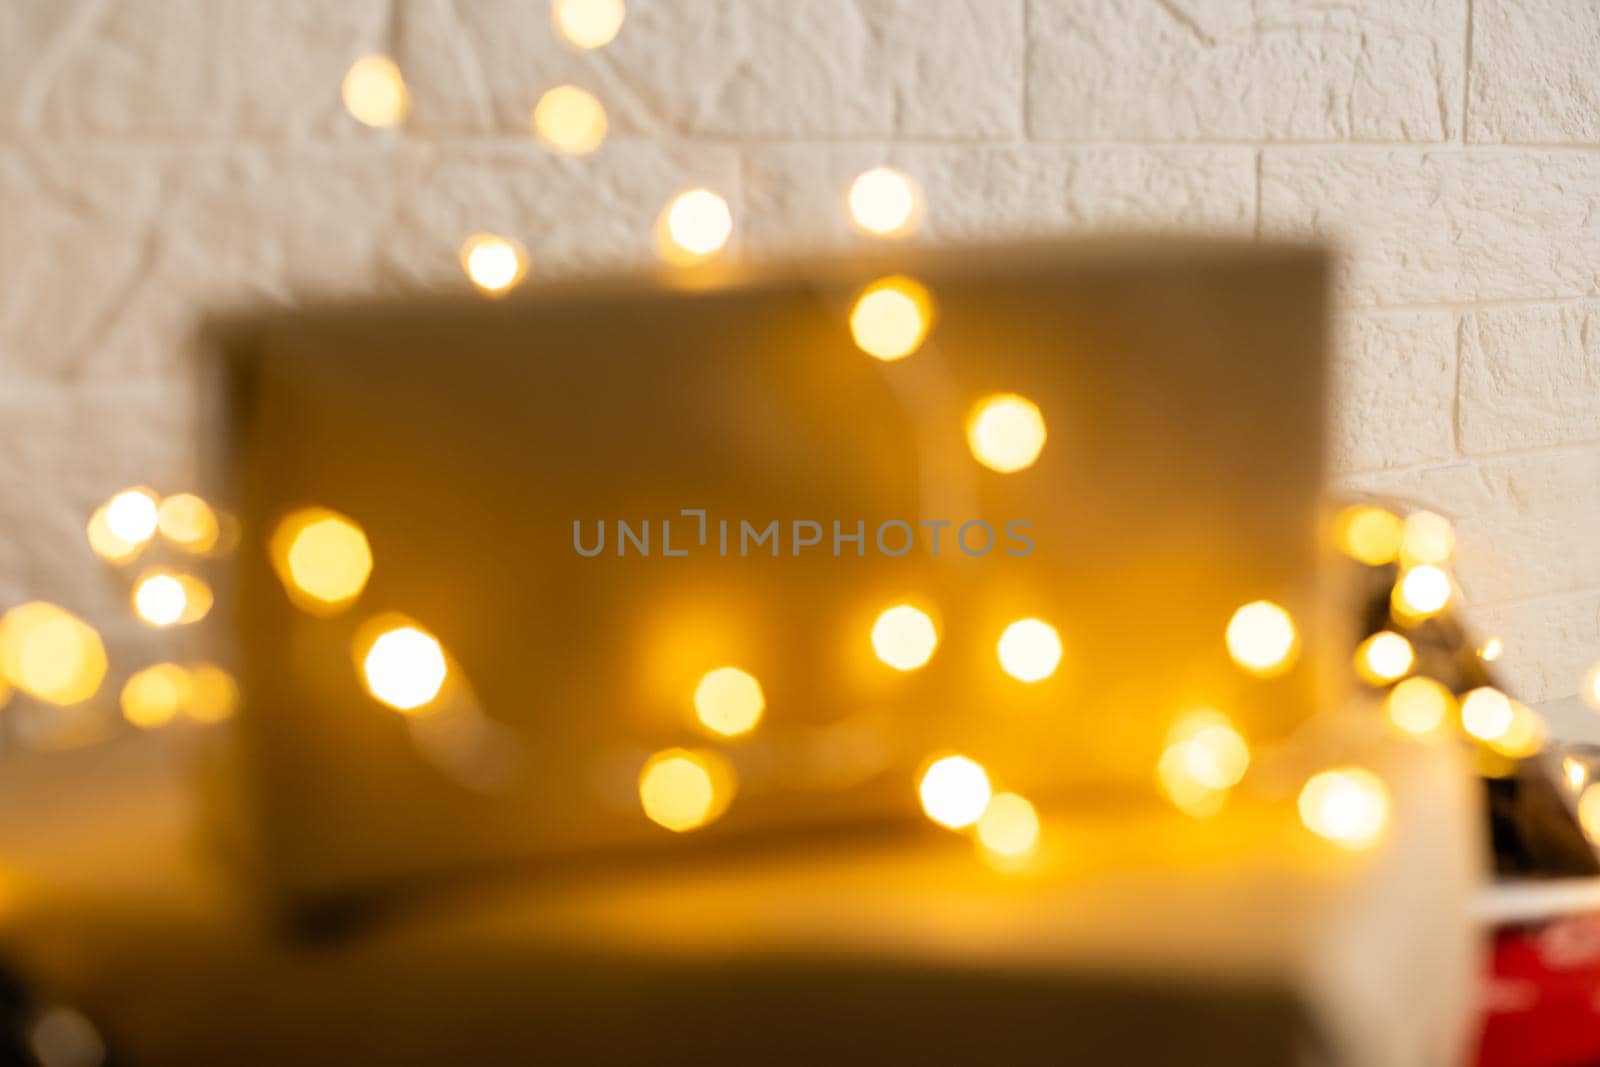 Blurred background. Bright glowing yellow-orange New Year, Christmas garland out of focus. by Andelov13